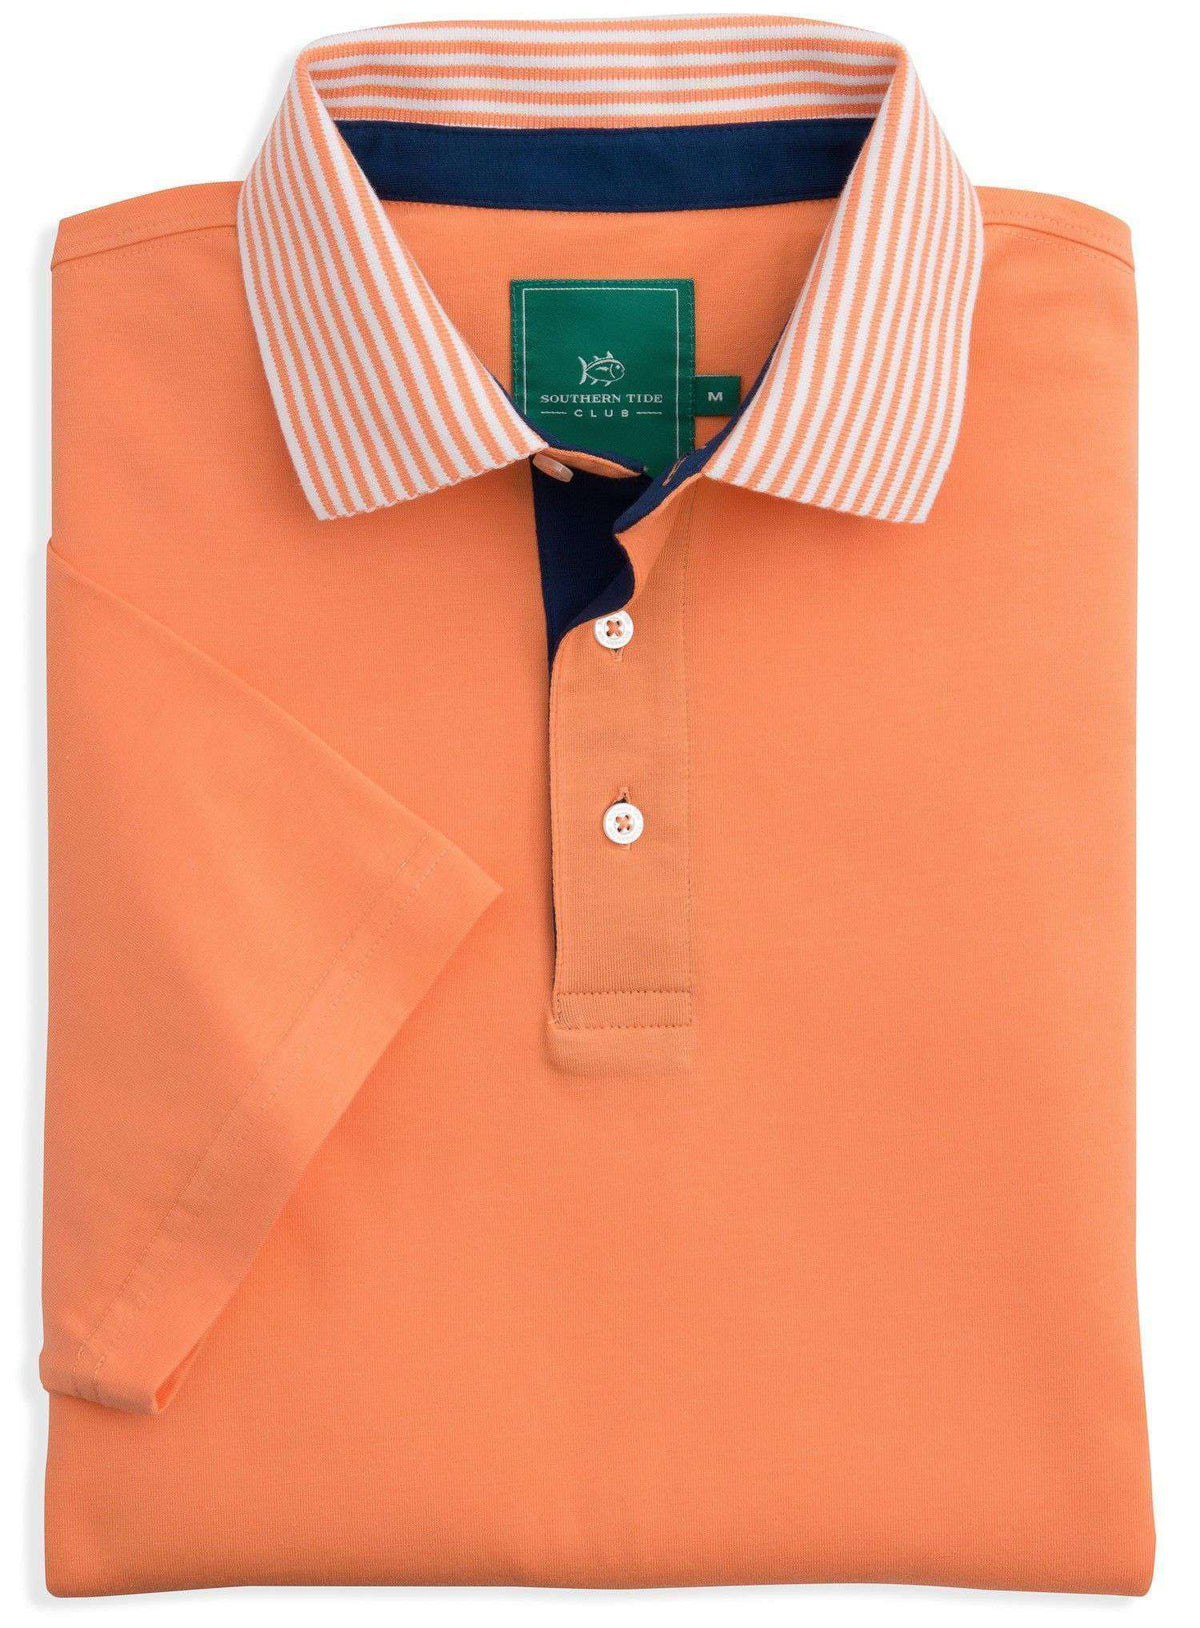 Coastal Pines Striped Collar Club Polo in Nautical Orange by Southern Tide - Country Club Prep